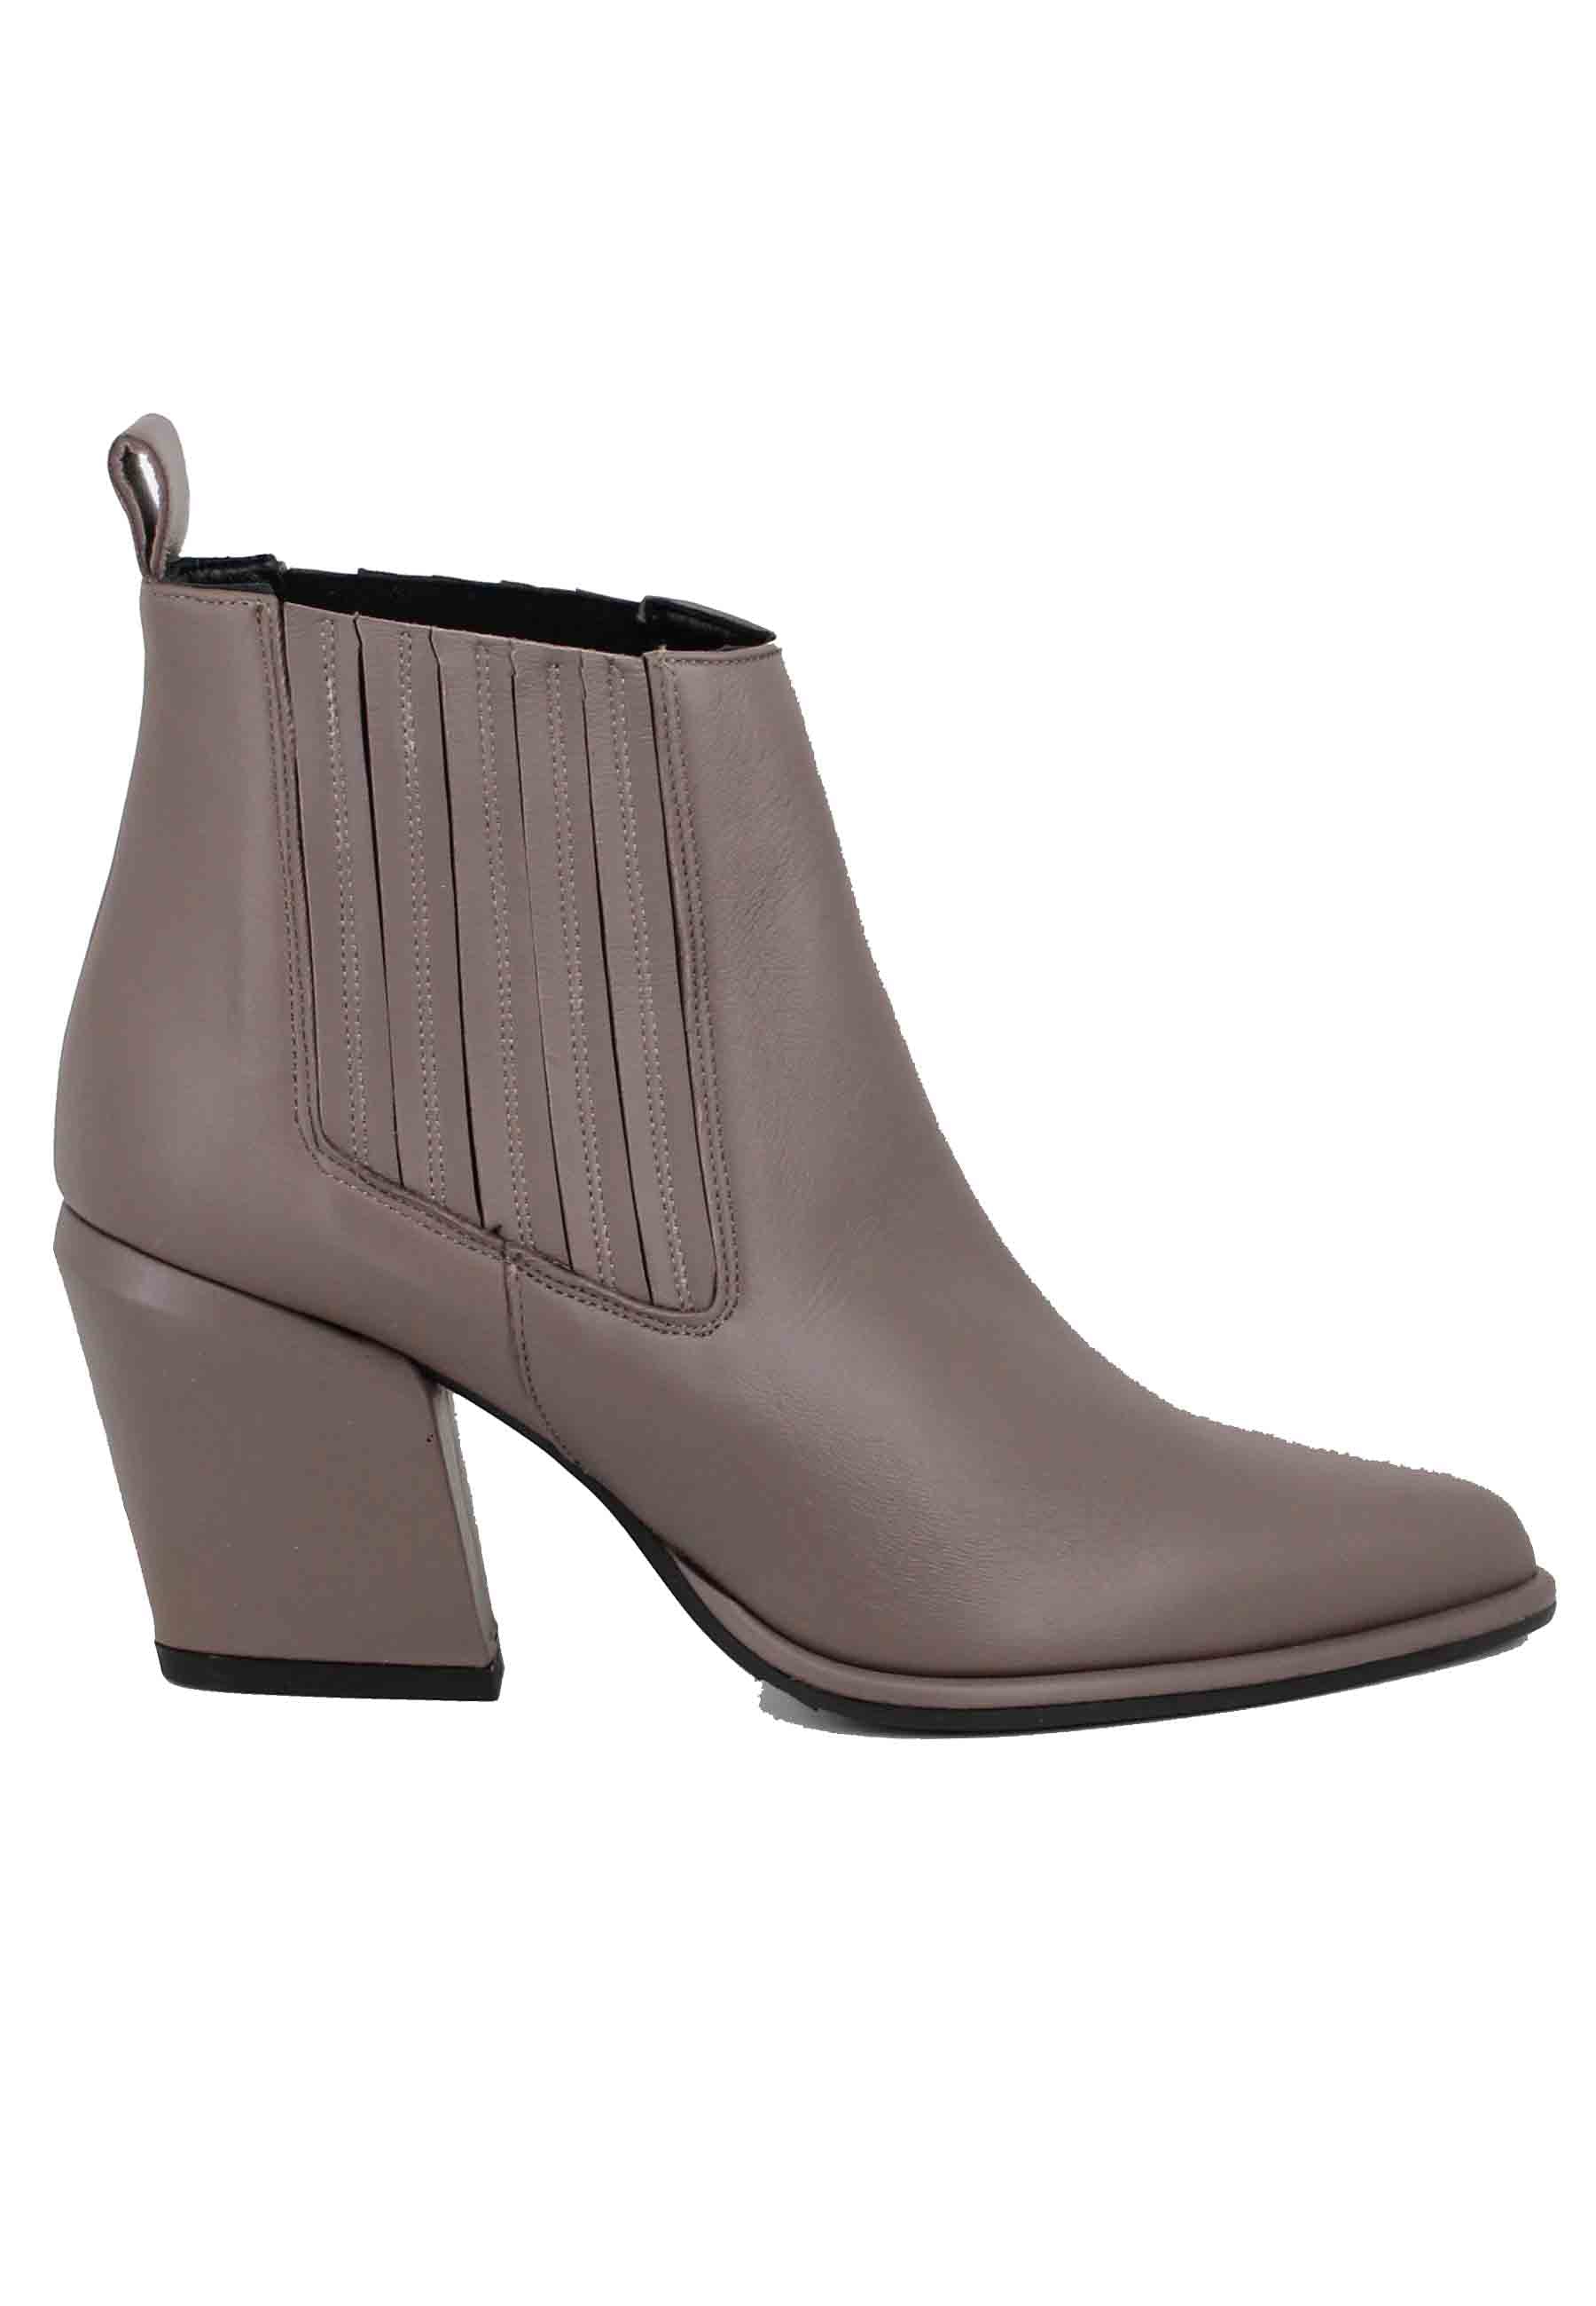 Women's Beatles ankle boots in taupe leather